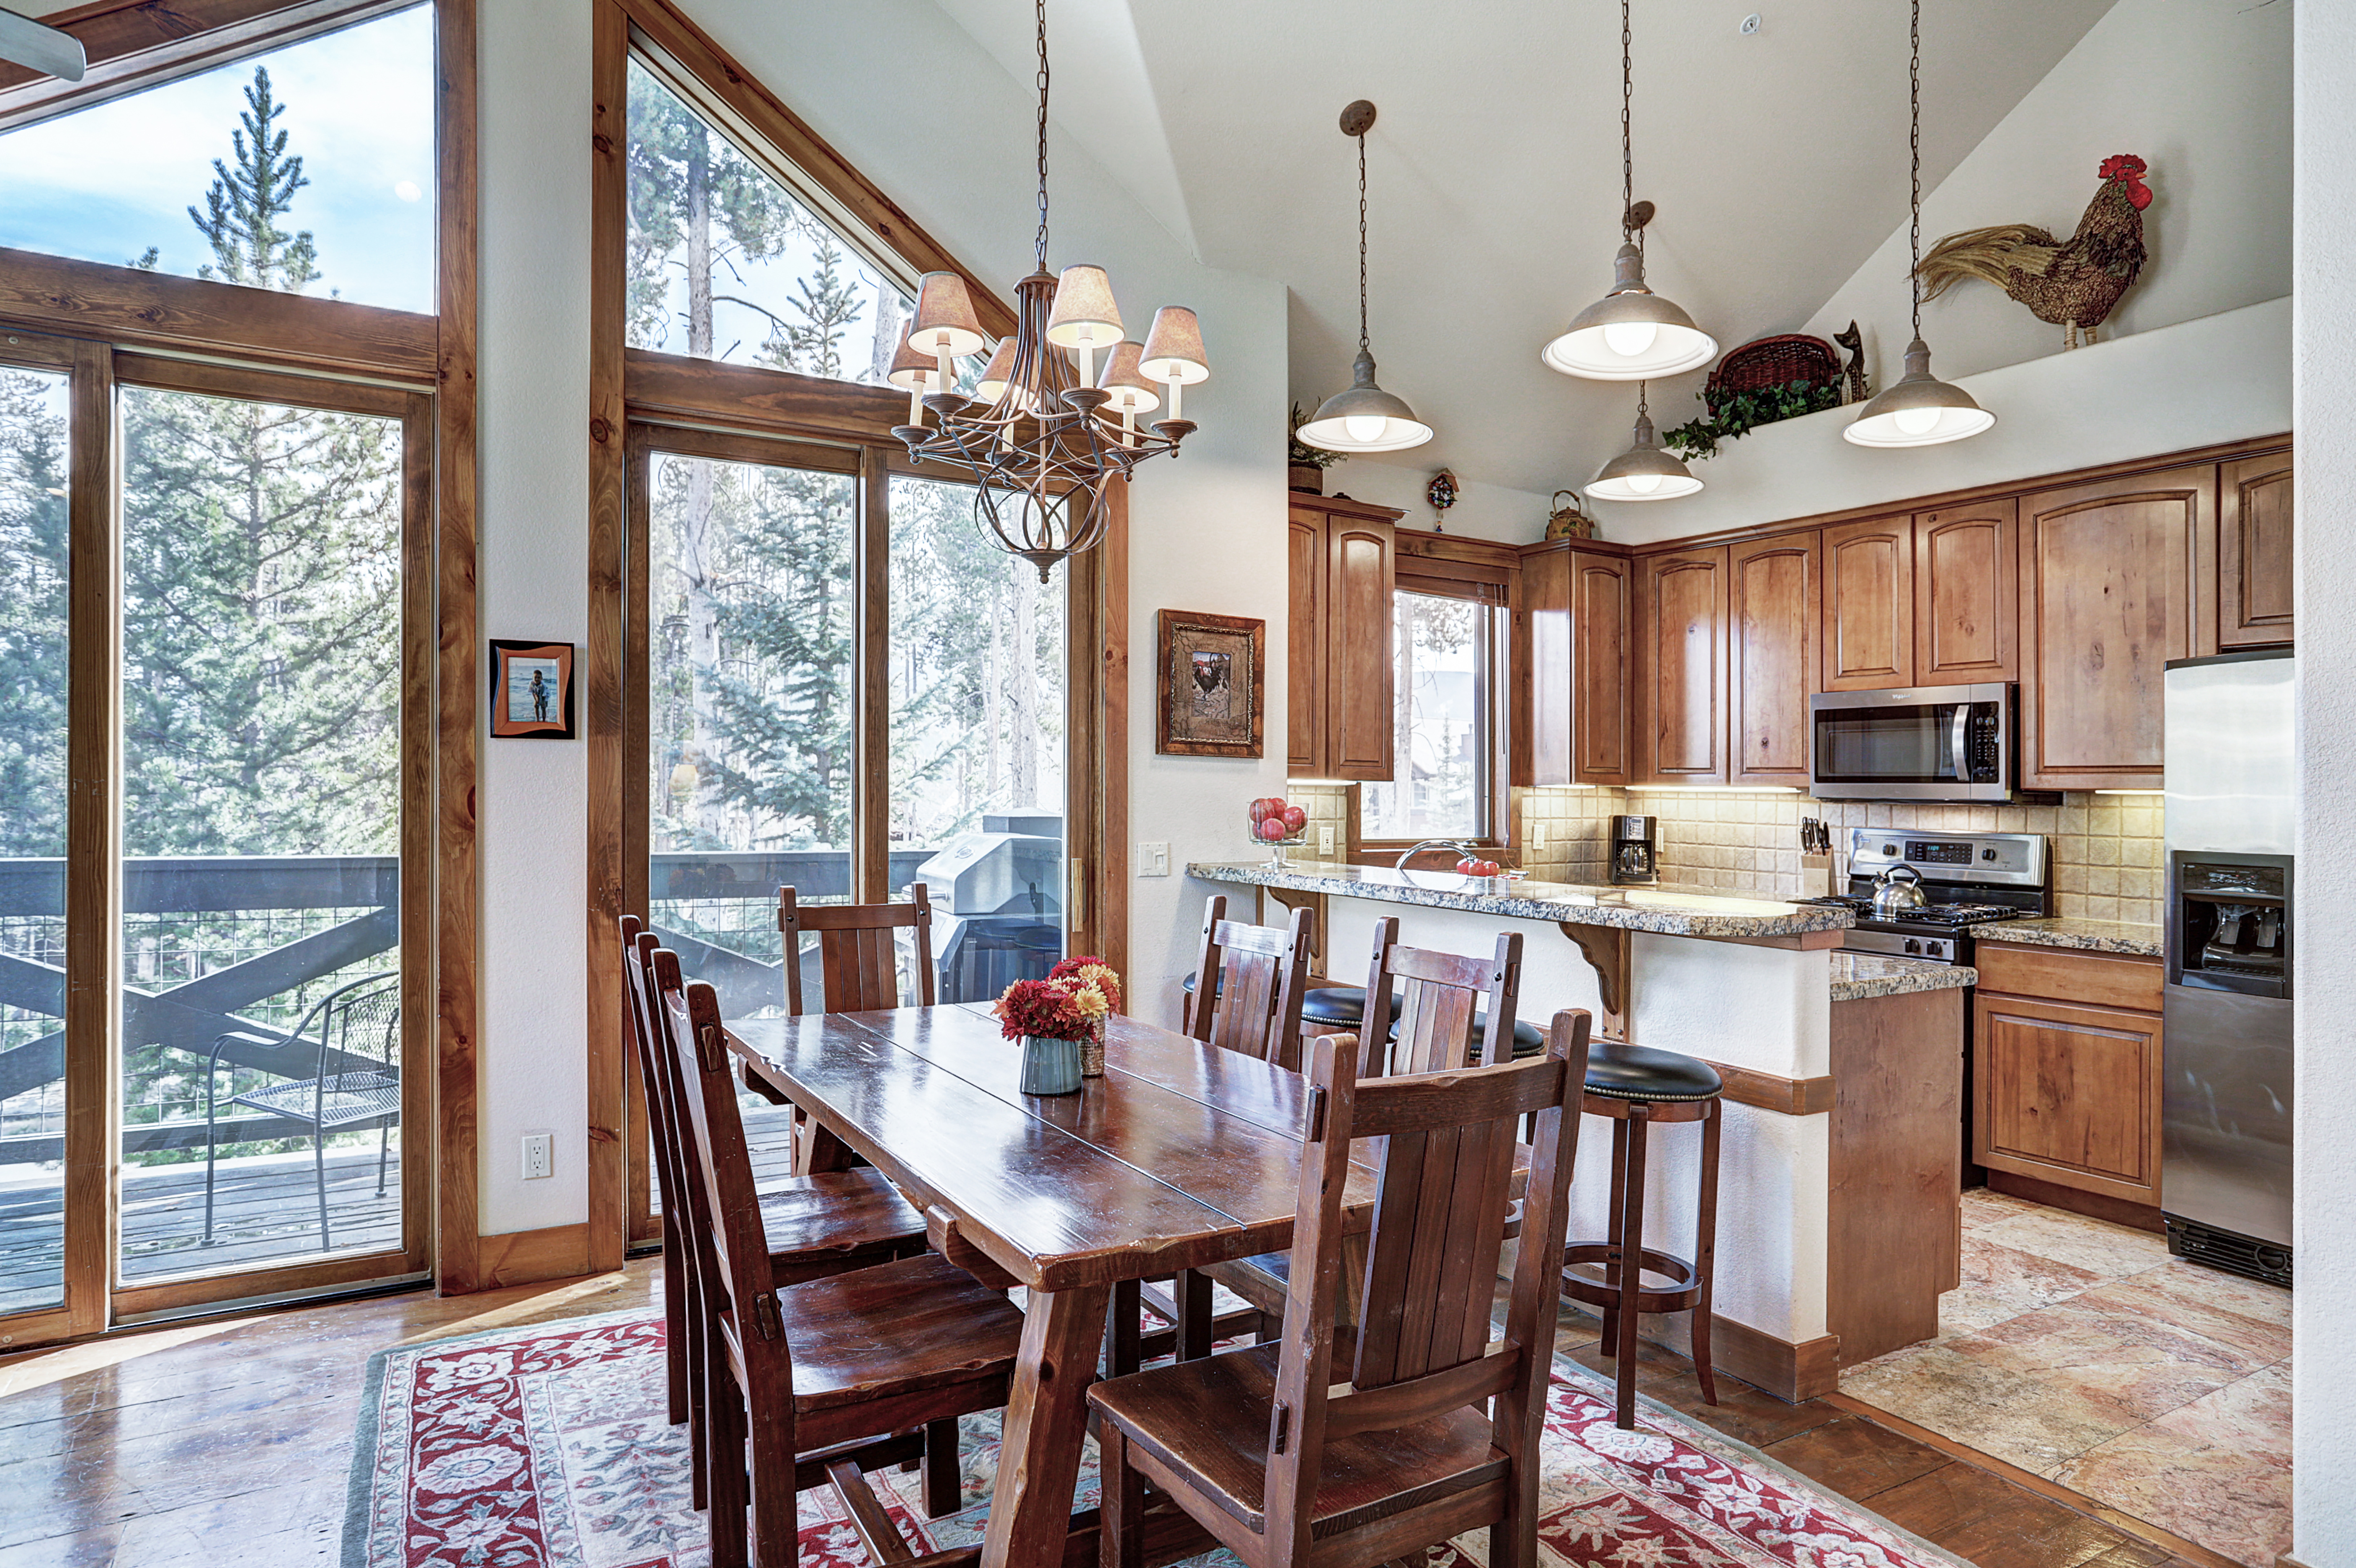 Enjoy dinner and a view in this open dining area - Amber Sky Breckenridge Vacation Rental